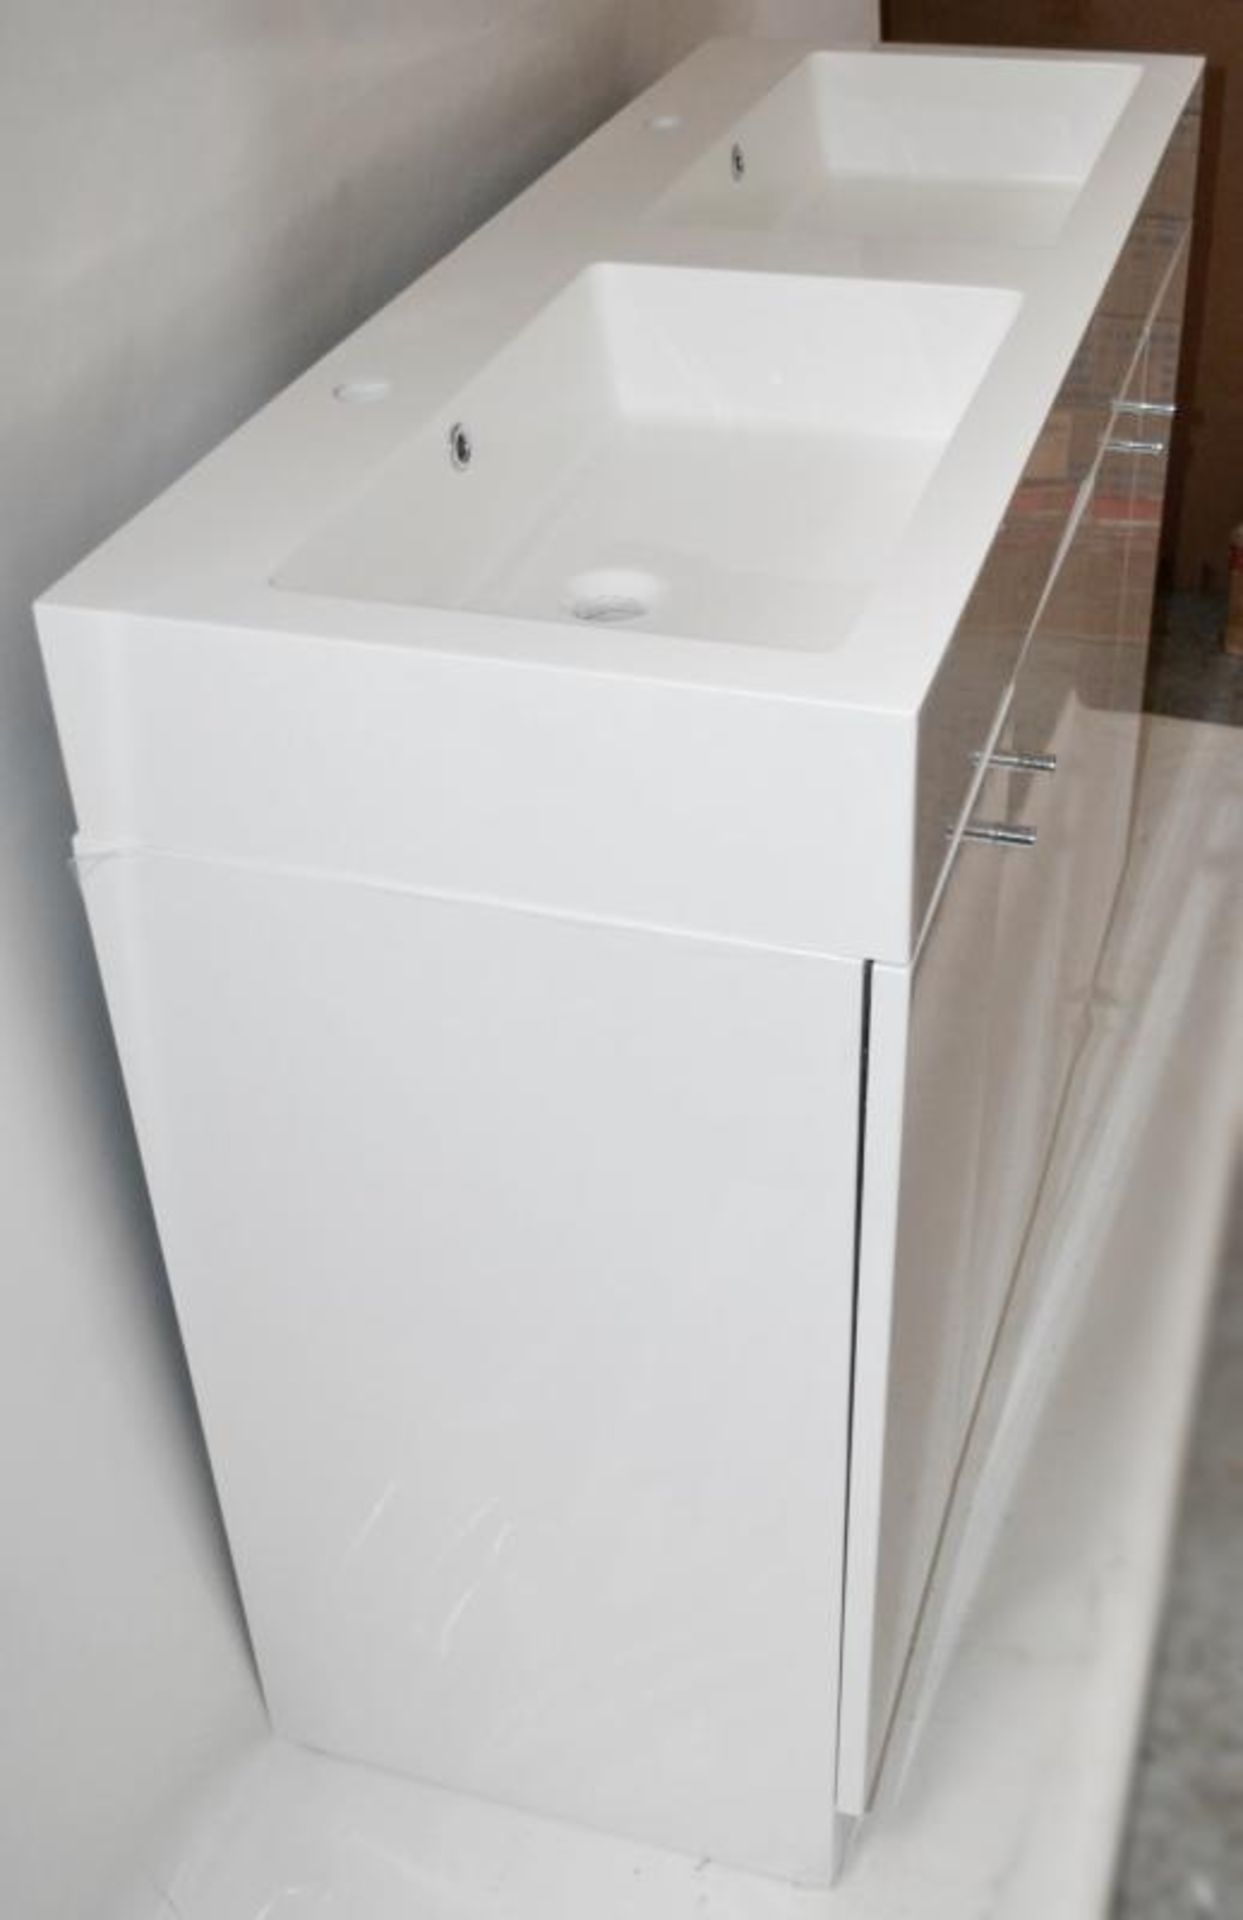 JOB LOT of 10 x Gloss White 1200mm 4-Door Double Basin Freestanding Bathroom Cabinet - New & Boxed - Image 2 of 7